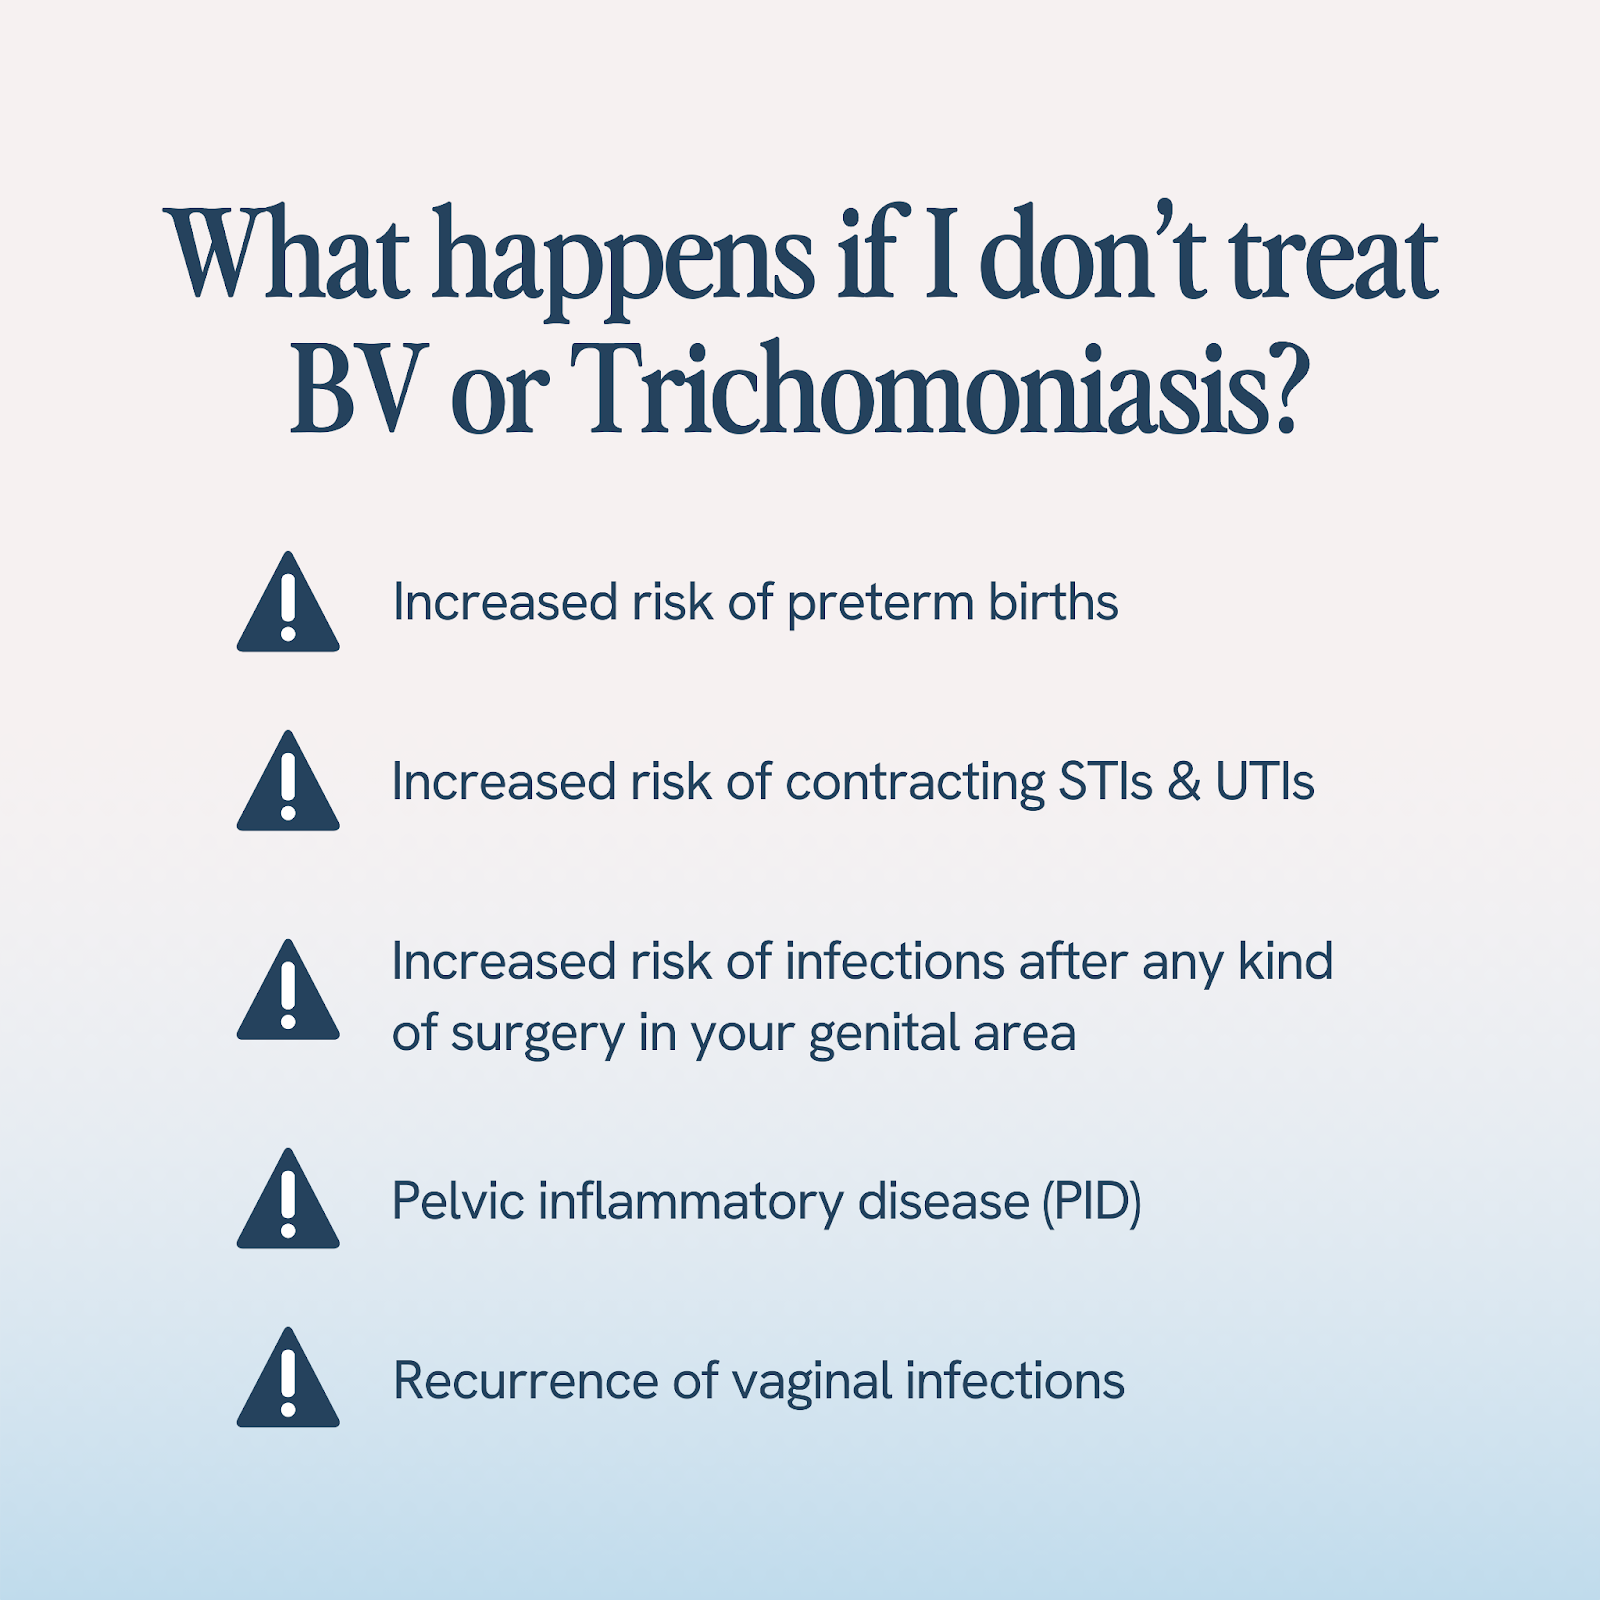 A health advisory image stating 'What happens if I don’t treat BV or Trichomoniasis?' Below are listed consequences: preterm birth risk, higher chance of STIs and UTIs, post-surgical infections, PID, and recurring vaginal infections. Each point is marked with a caution icon